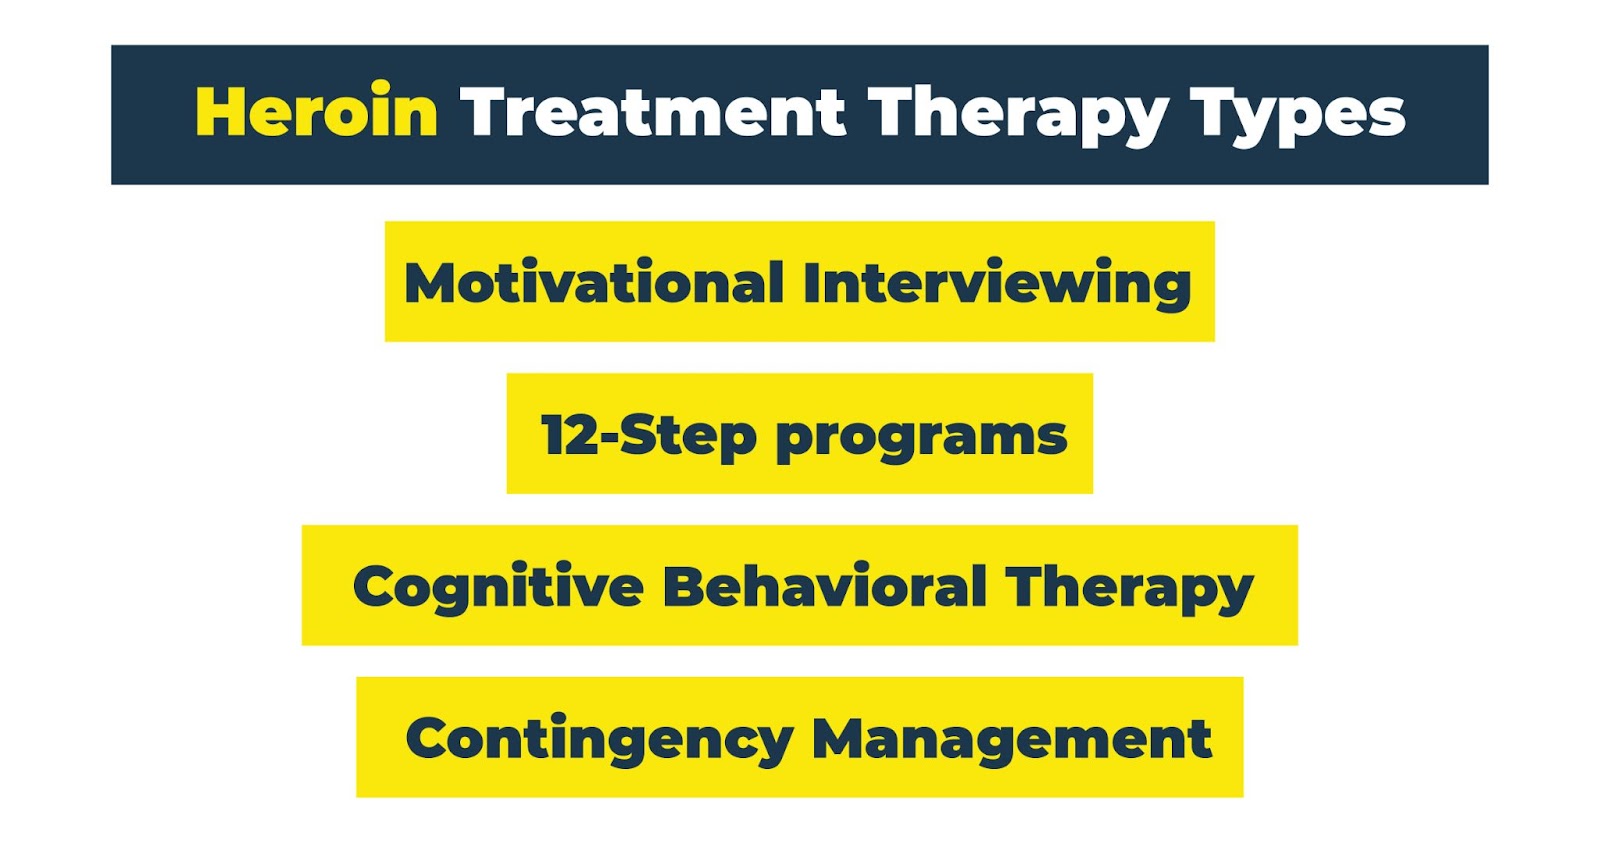 heroin treatment therapy types. motivational interviewing 12 step programs cognitive behavioral therapy contingency management